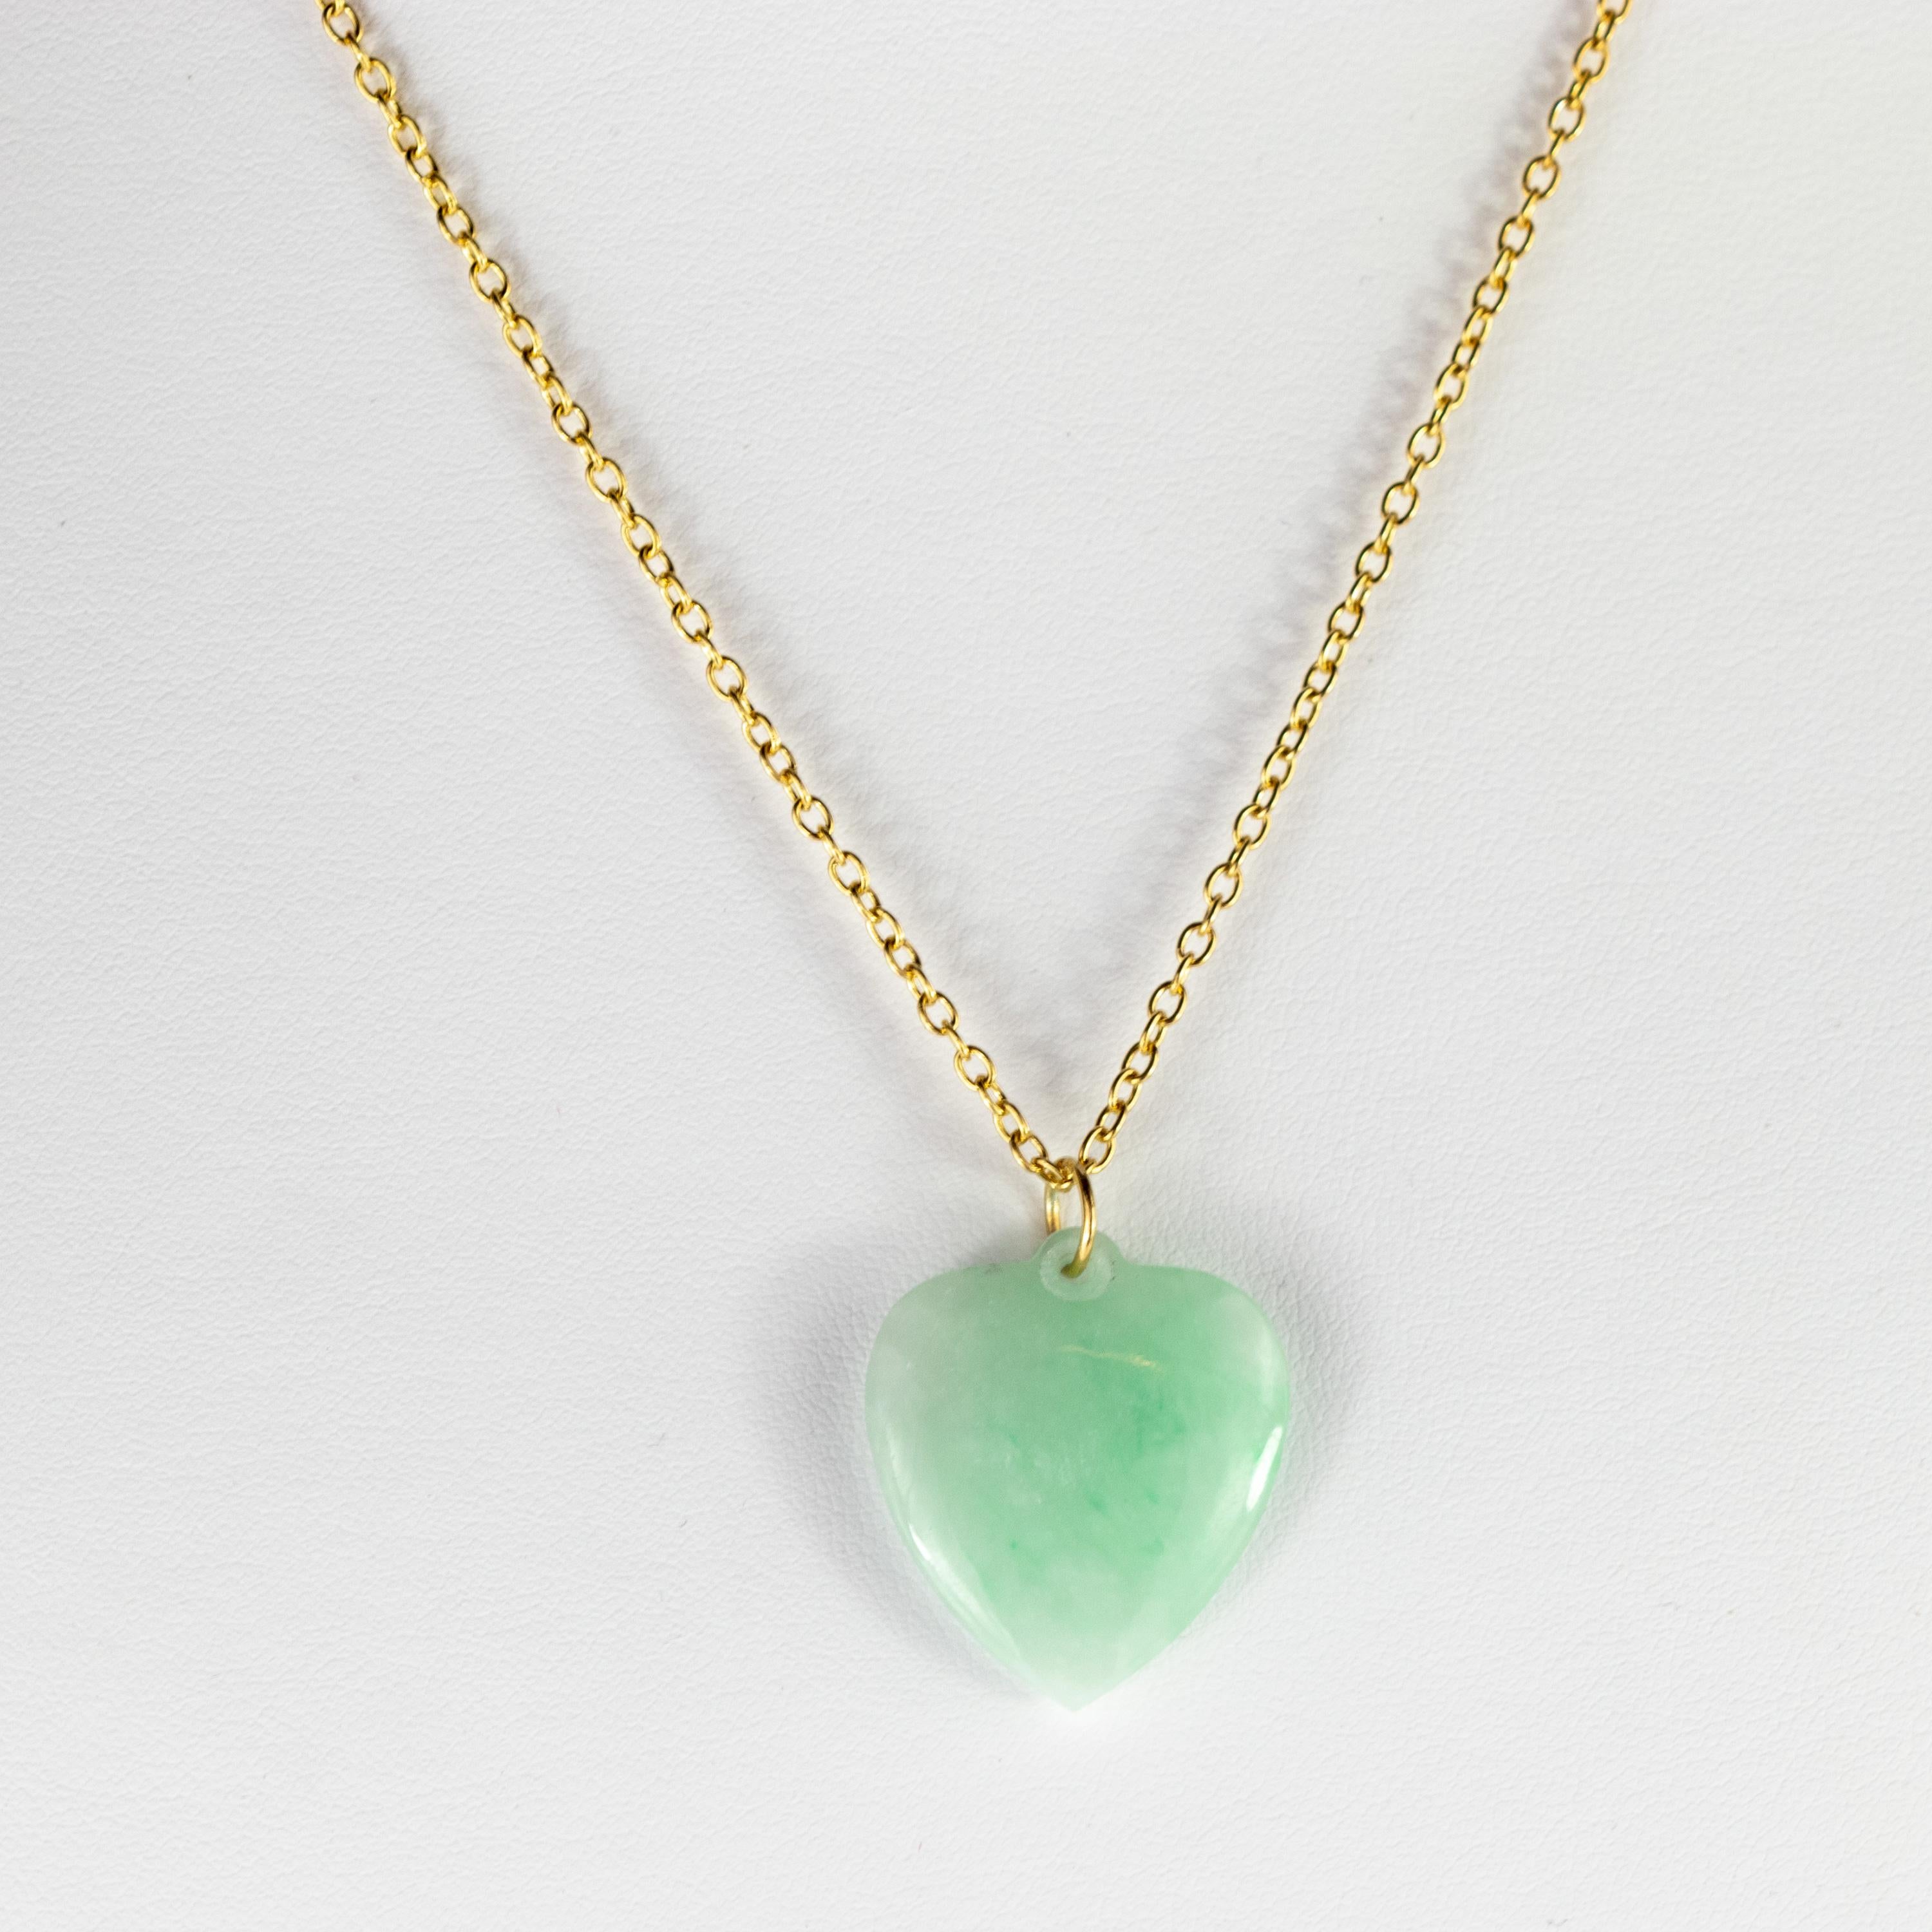 Take love with you everywhere! This breathtaking necklace has a sweet design with the most precious gemstone hanging from a delicate 18 karat yellow gold chain. The Natural 29 carats Jade activates spiritual awareness, opens intuition and enhances